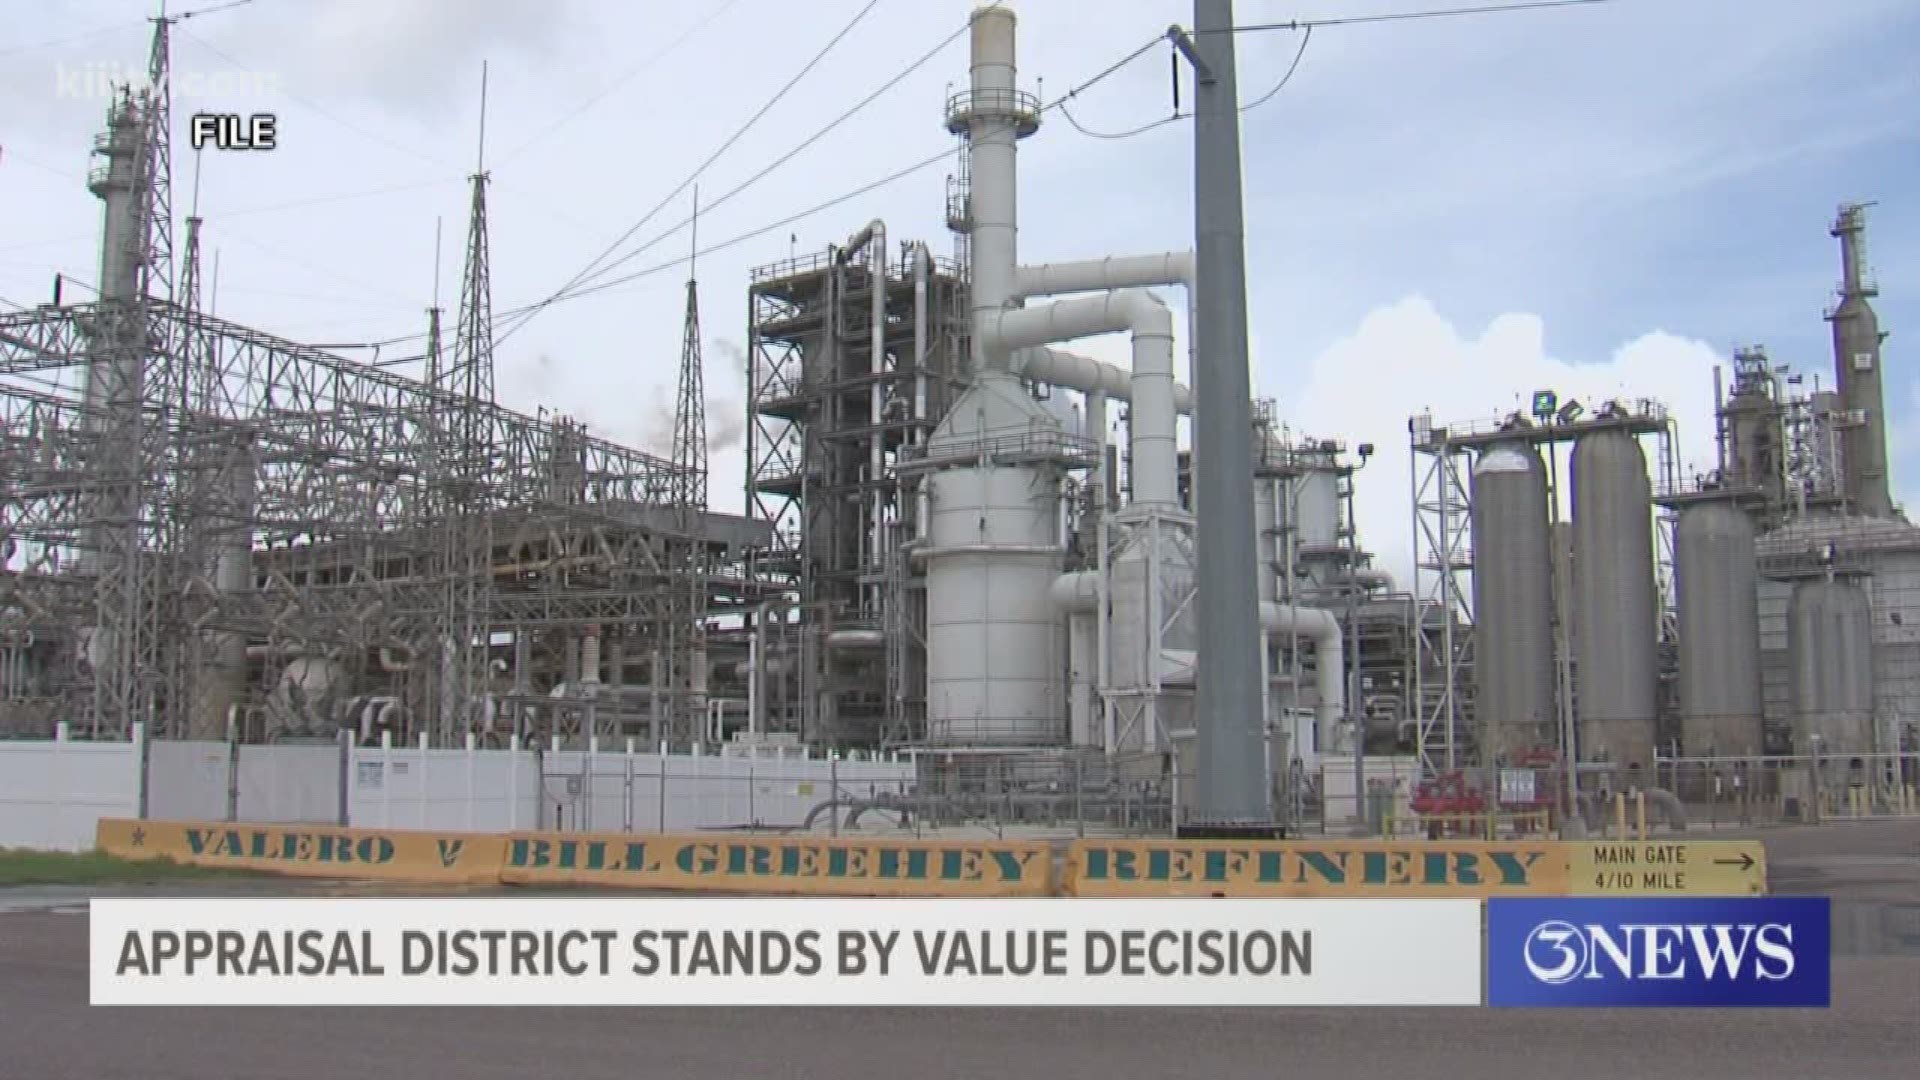 Chief Appraiser Ronnie Canales said he stands by his decision to deem the Valero property in Corpus Christi at $1.2 billion.